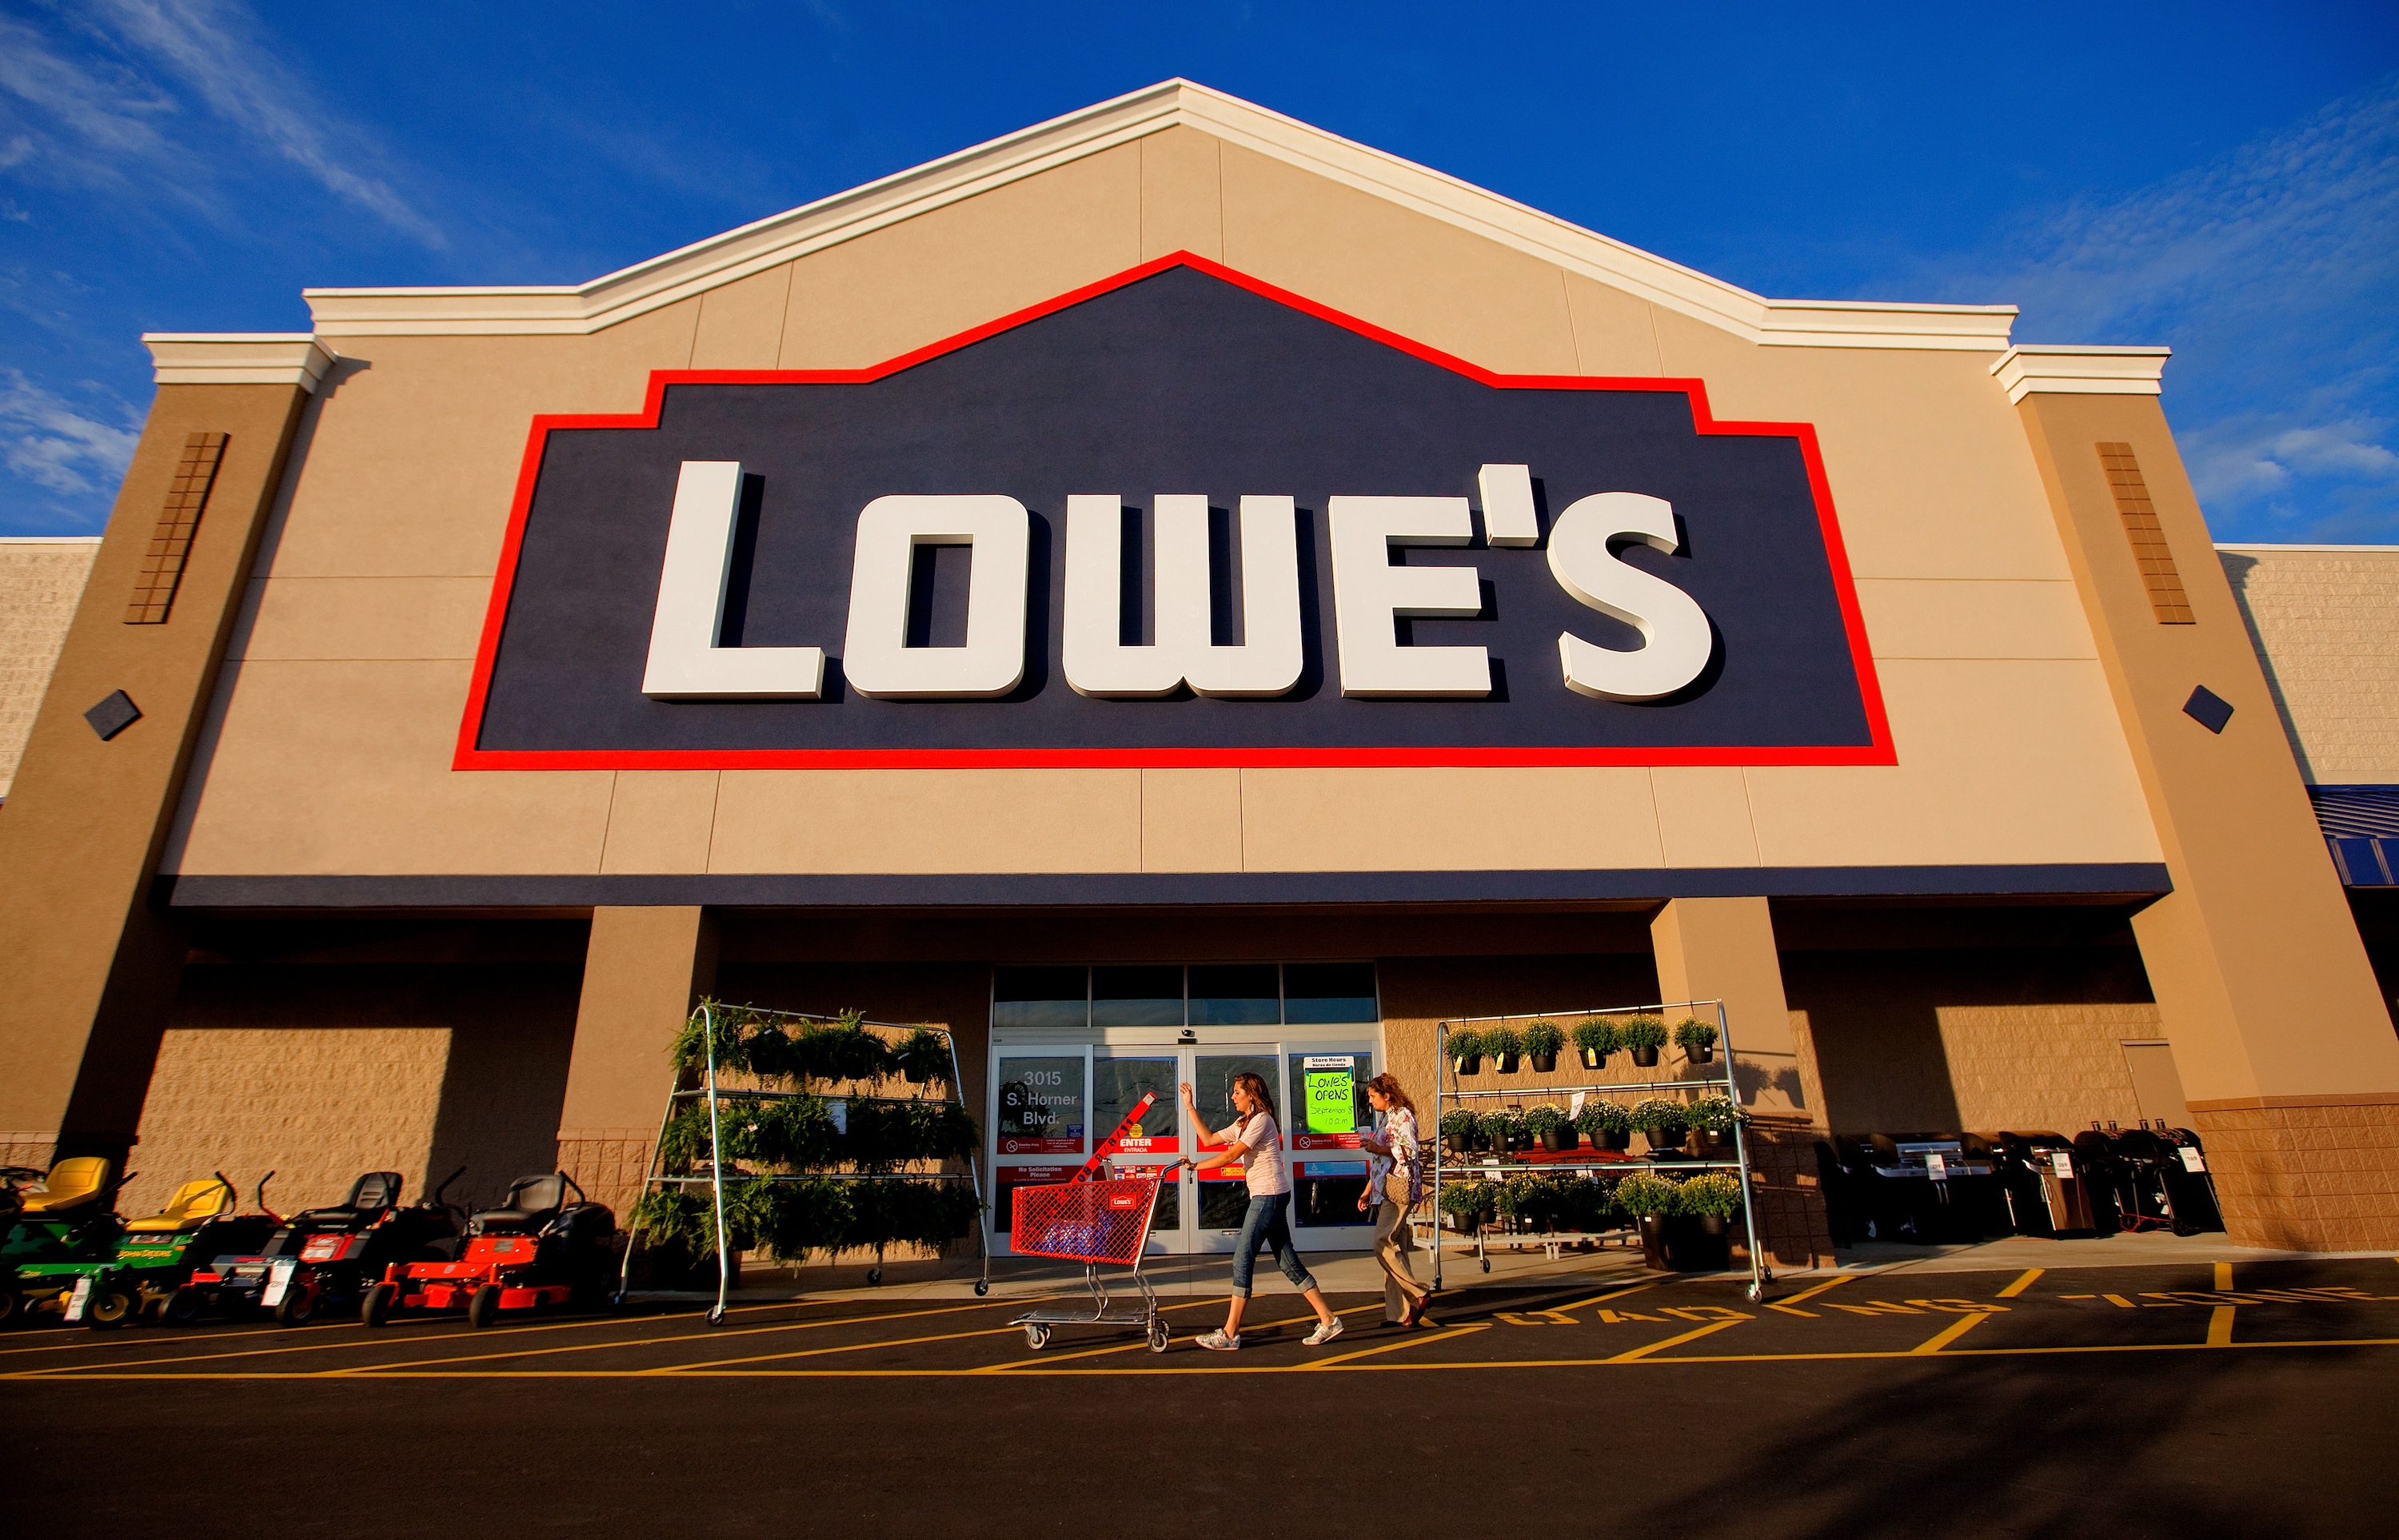 Get a $10 off $50 With Any Lowe’s Purchase!